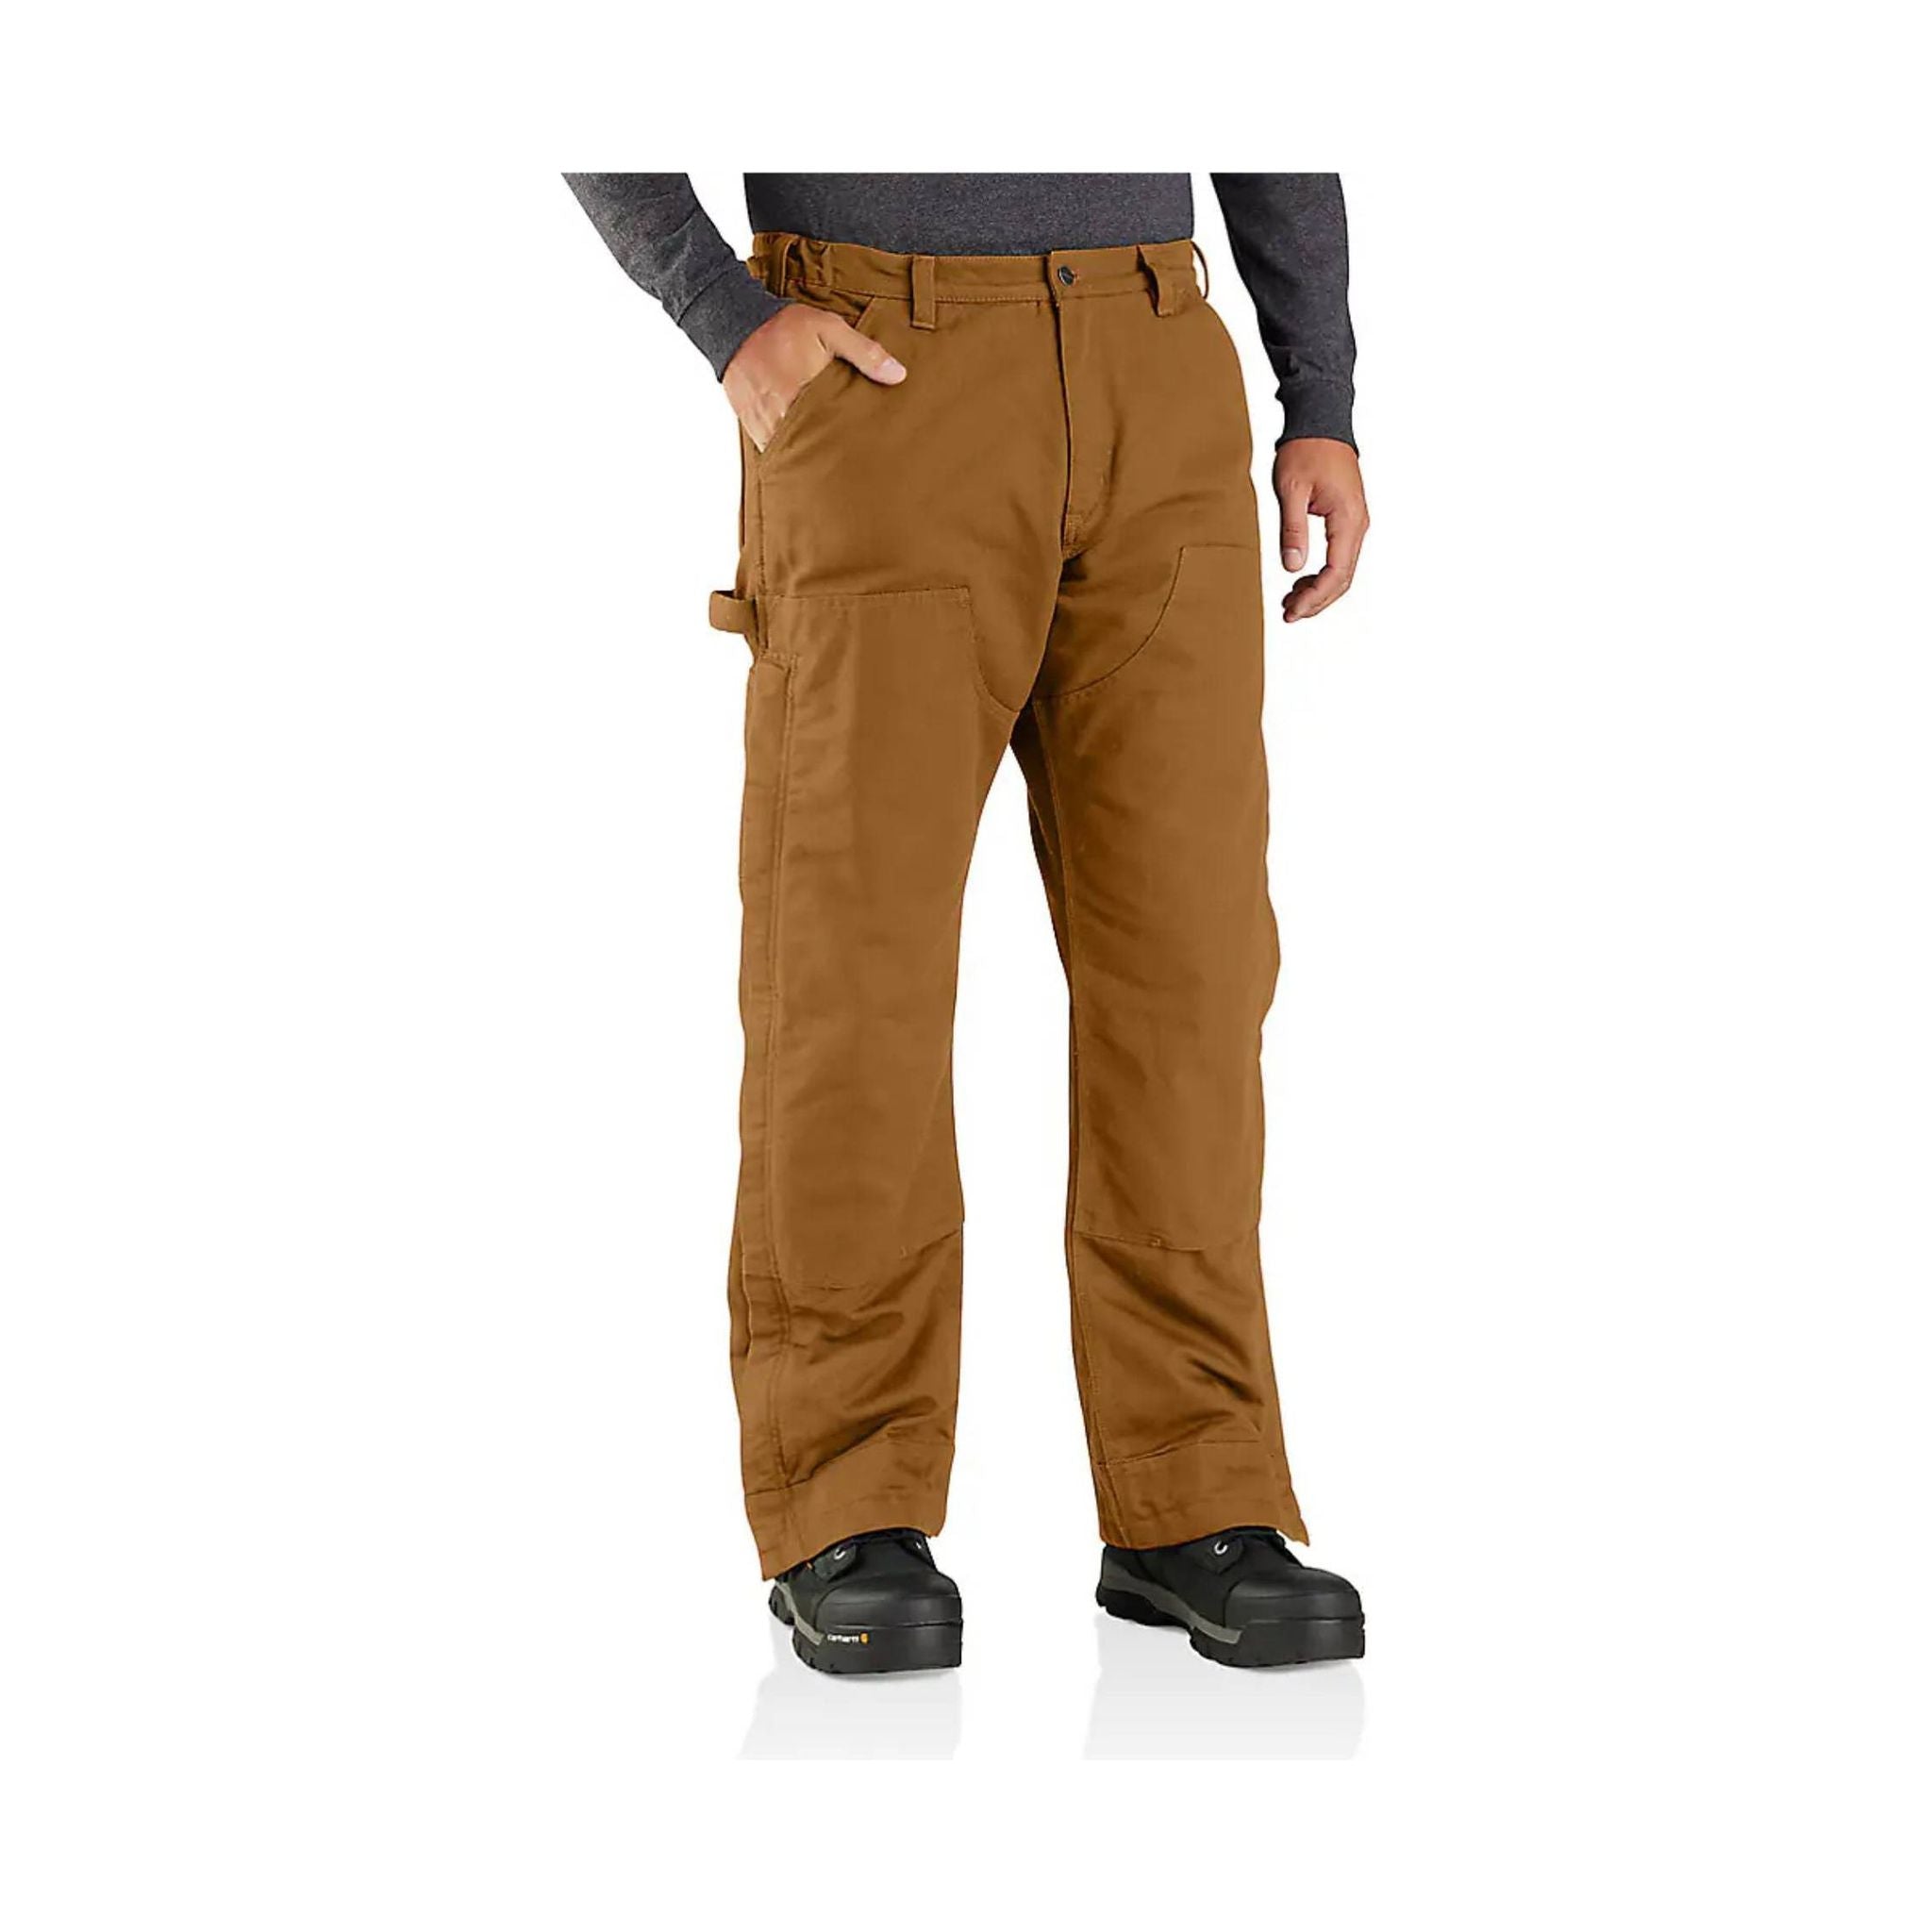 Carhartt Men's Loose Fit Washed Duck Double-Front Utility Work